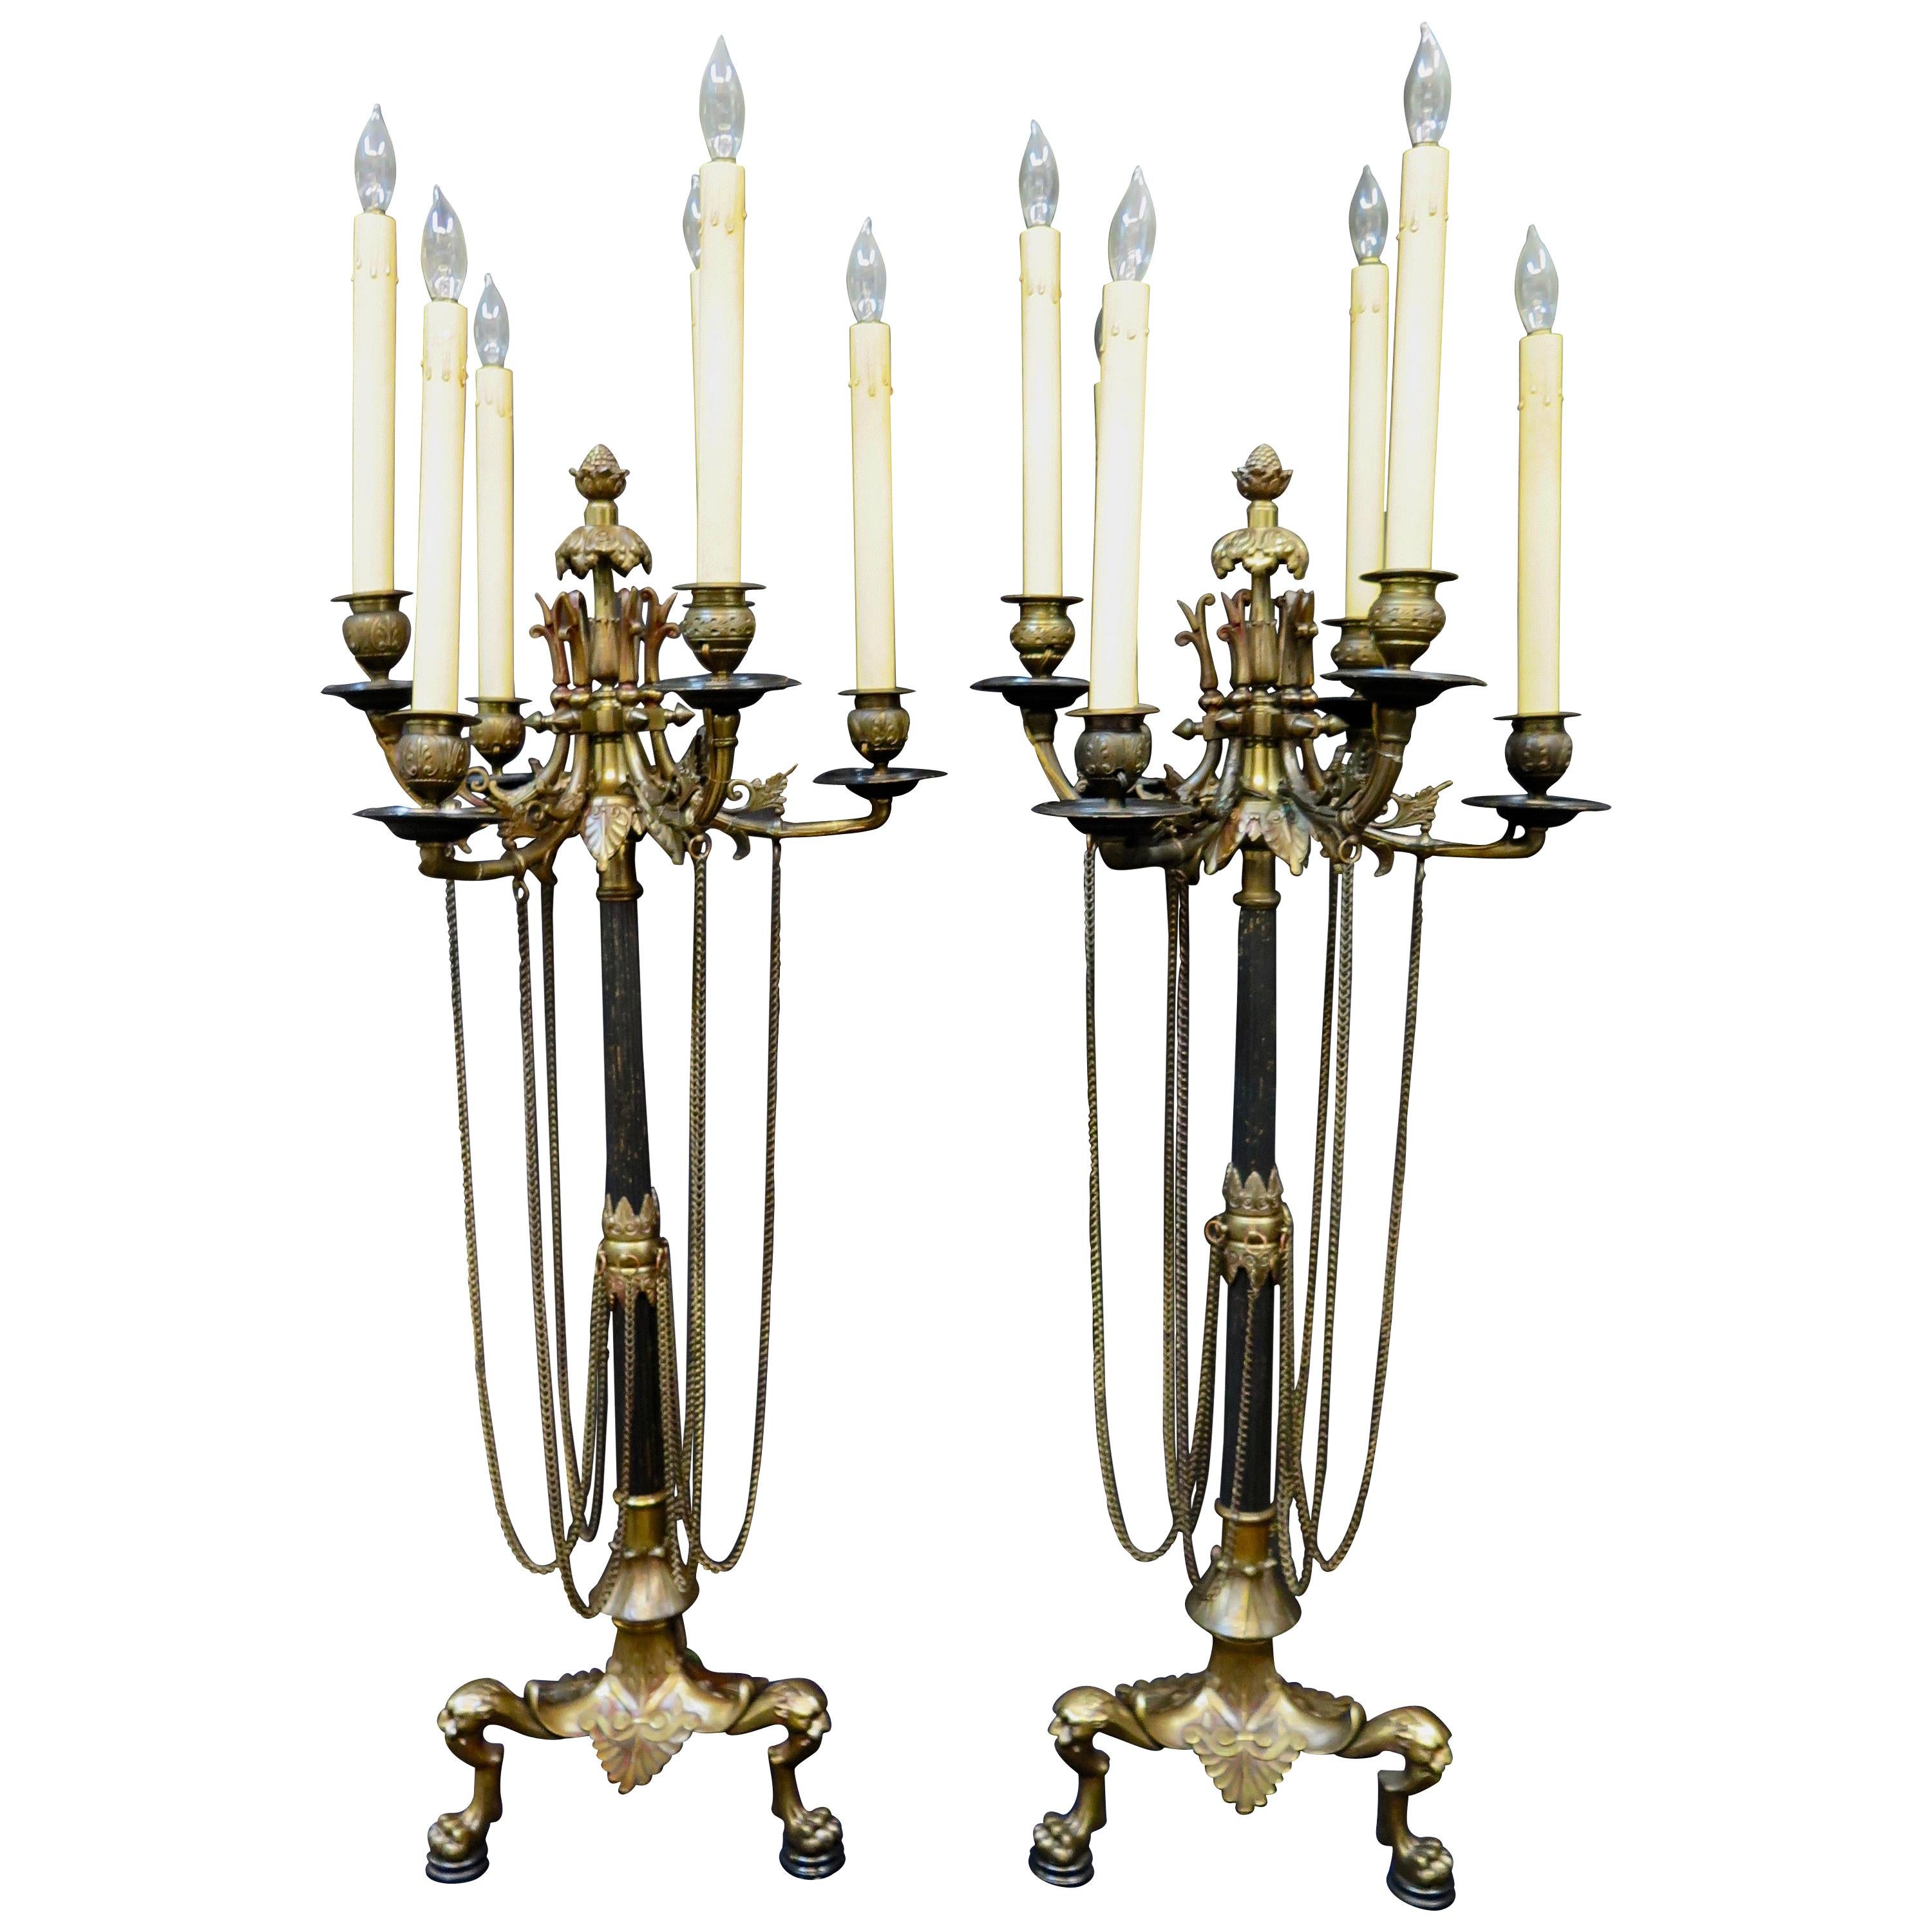 Vintage Early 20th Century Tall Edwardian Candelabra Lamps For Sale